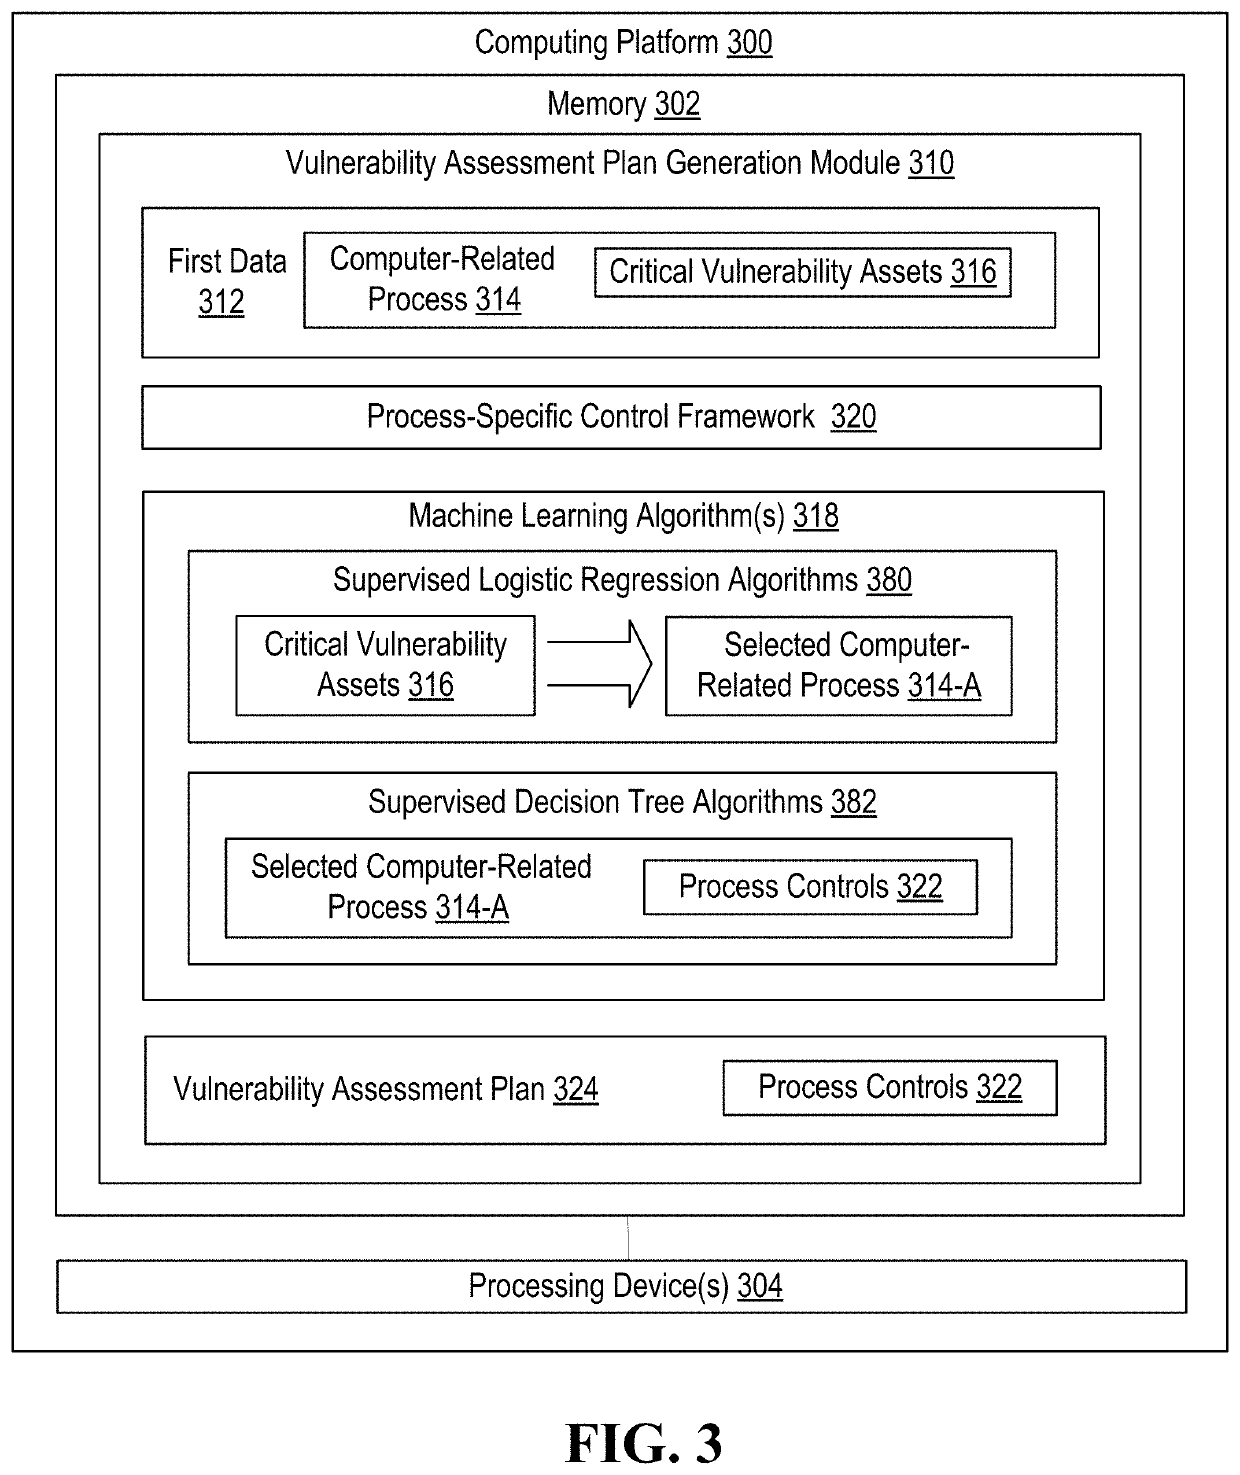 Information technology security assessment model for process flows and associated automated remediation